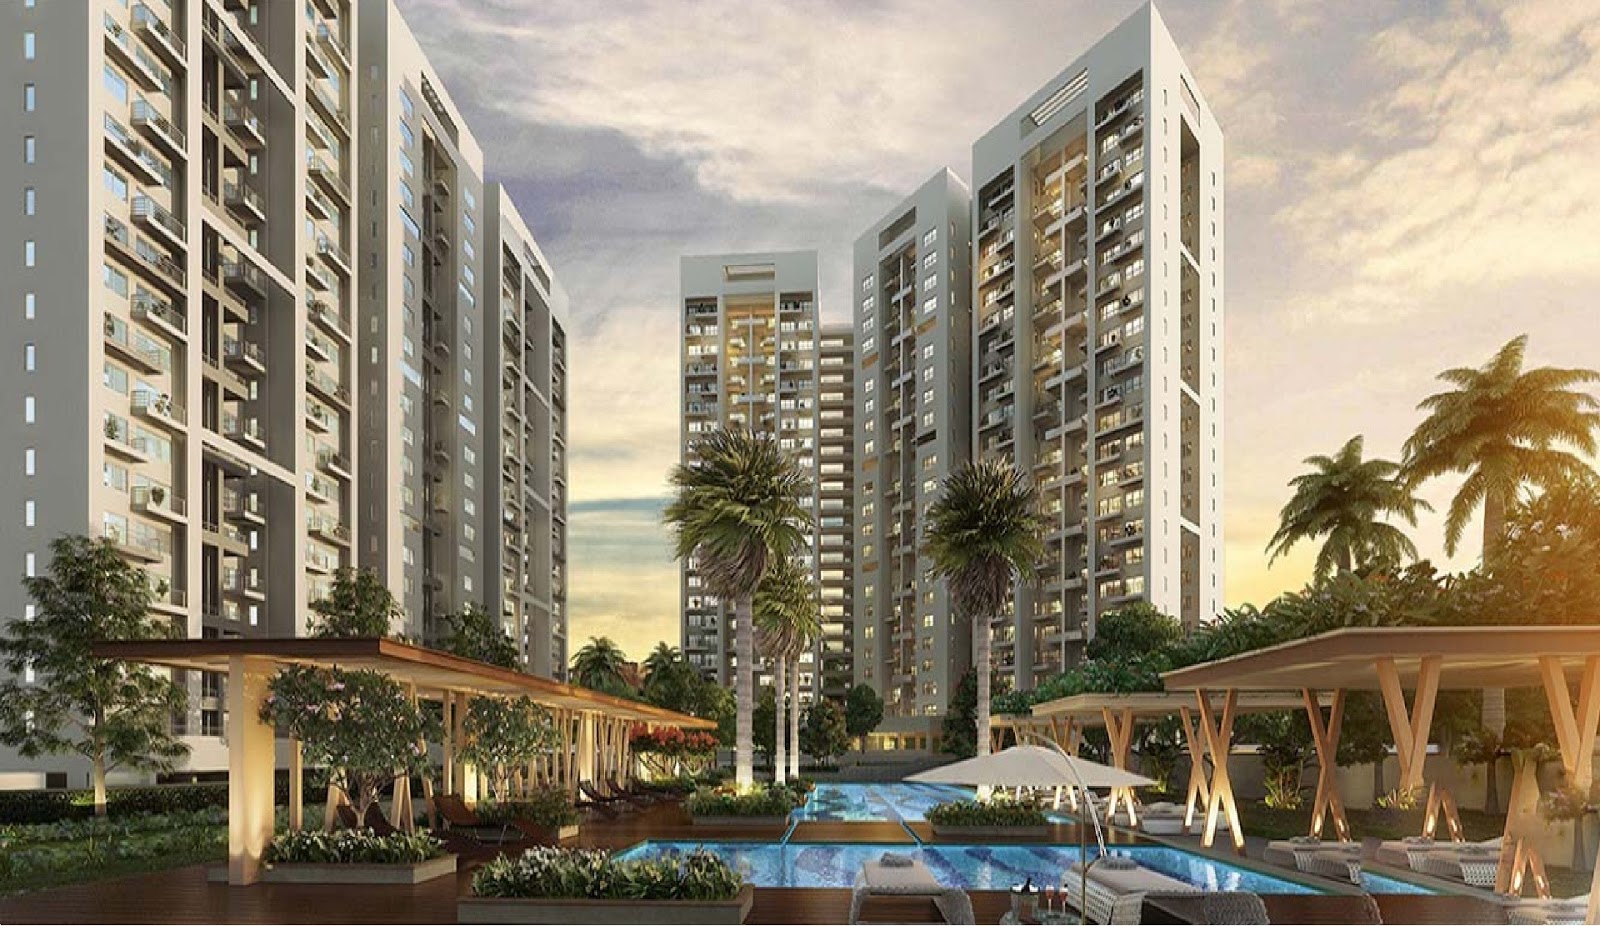 GODREJ NEST--WHERE EXTRAVAGANCE IS A WAY OF LIFE